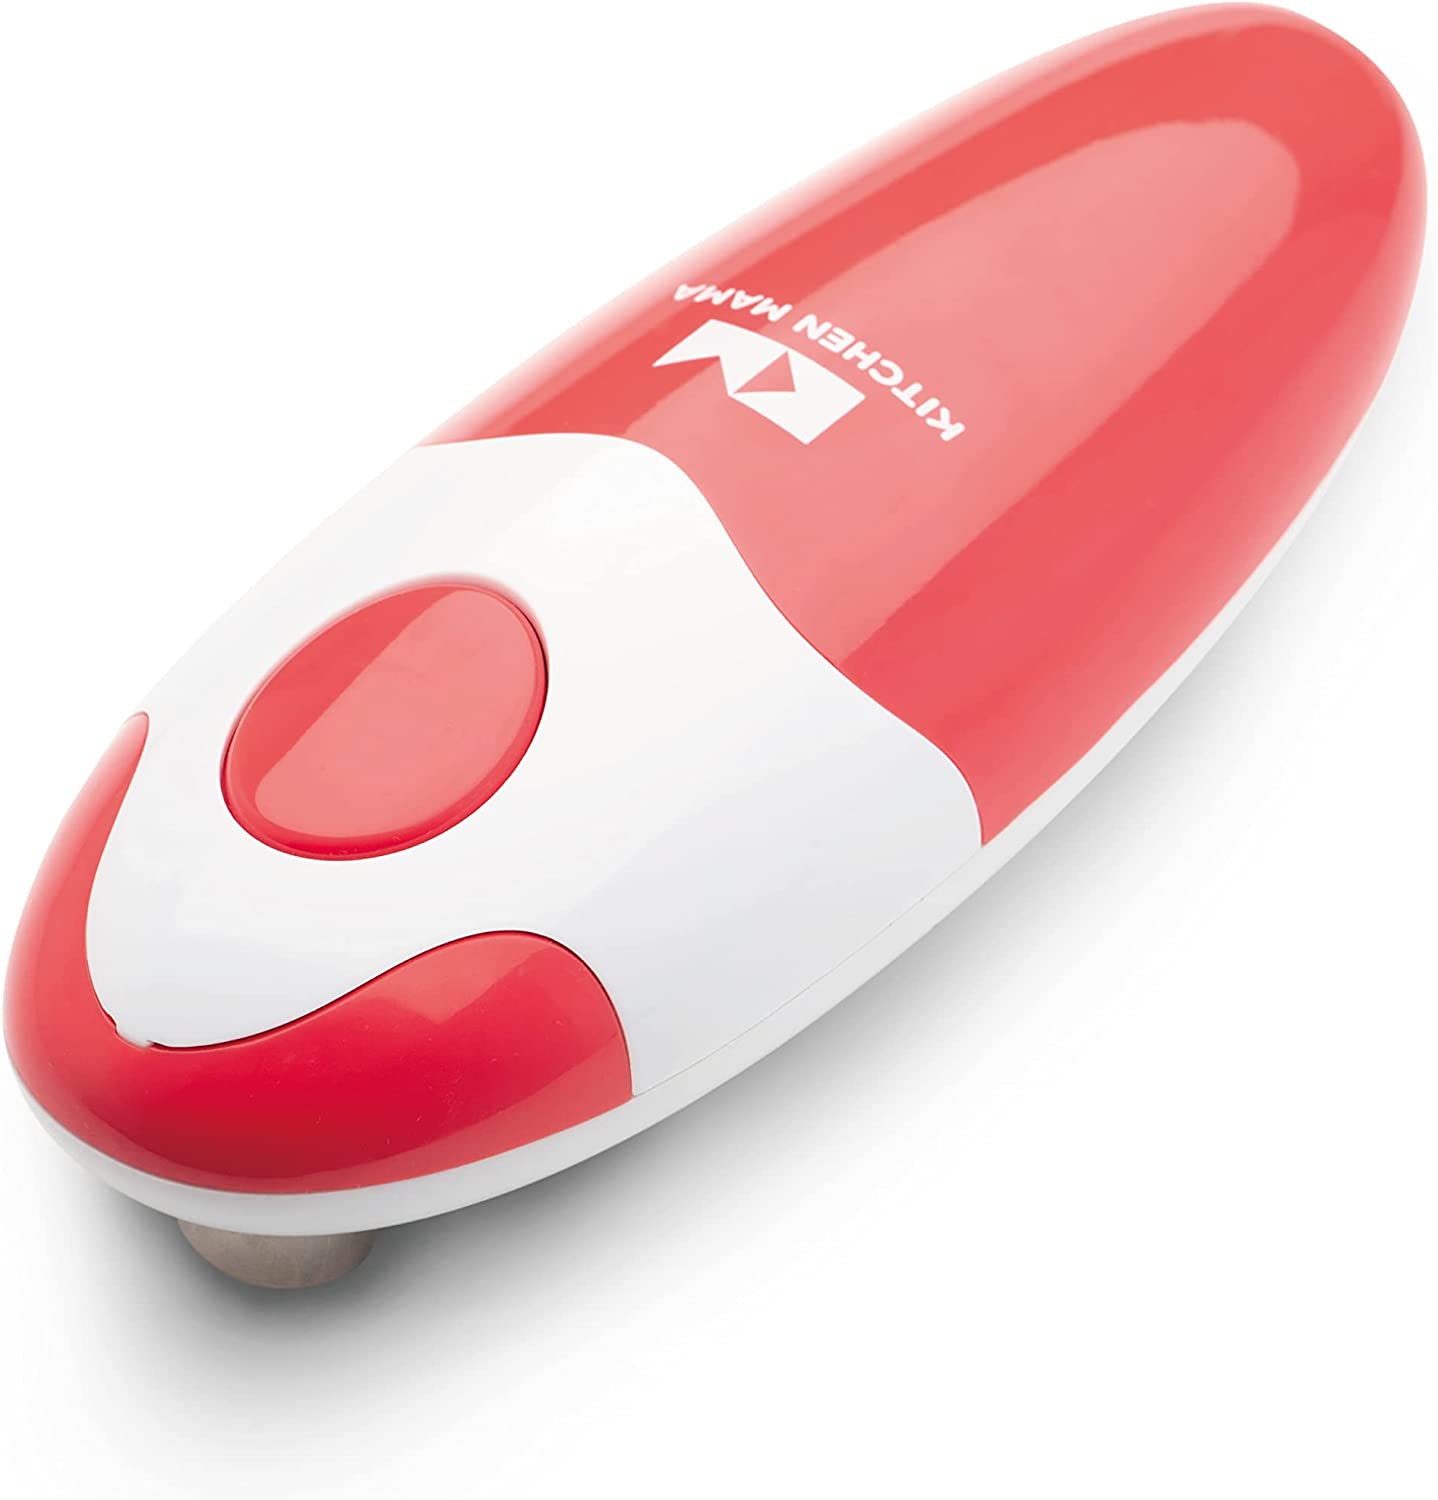 Kitchen Mama Electric Can Opener, Red - image 1 of 7